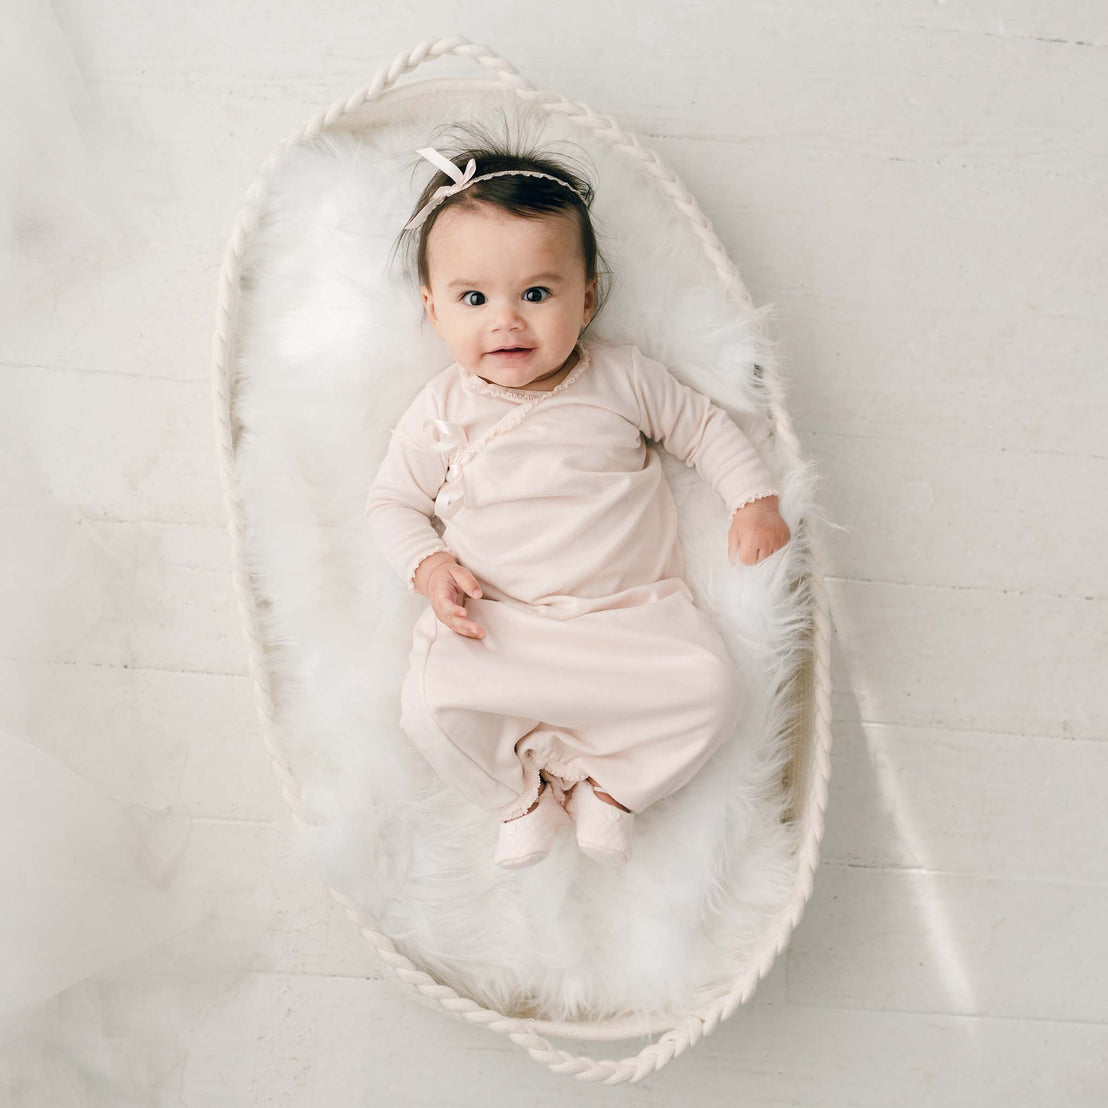 A cute newborn girl with dark hair wears the Ava Headband and matching Ava Newborn Layette and Ava Quilted Booties lies in an oval-shaped basket lined with soft white fur and looks upwards with a slight smile